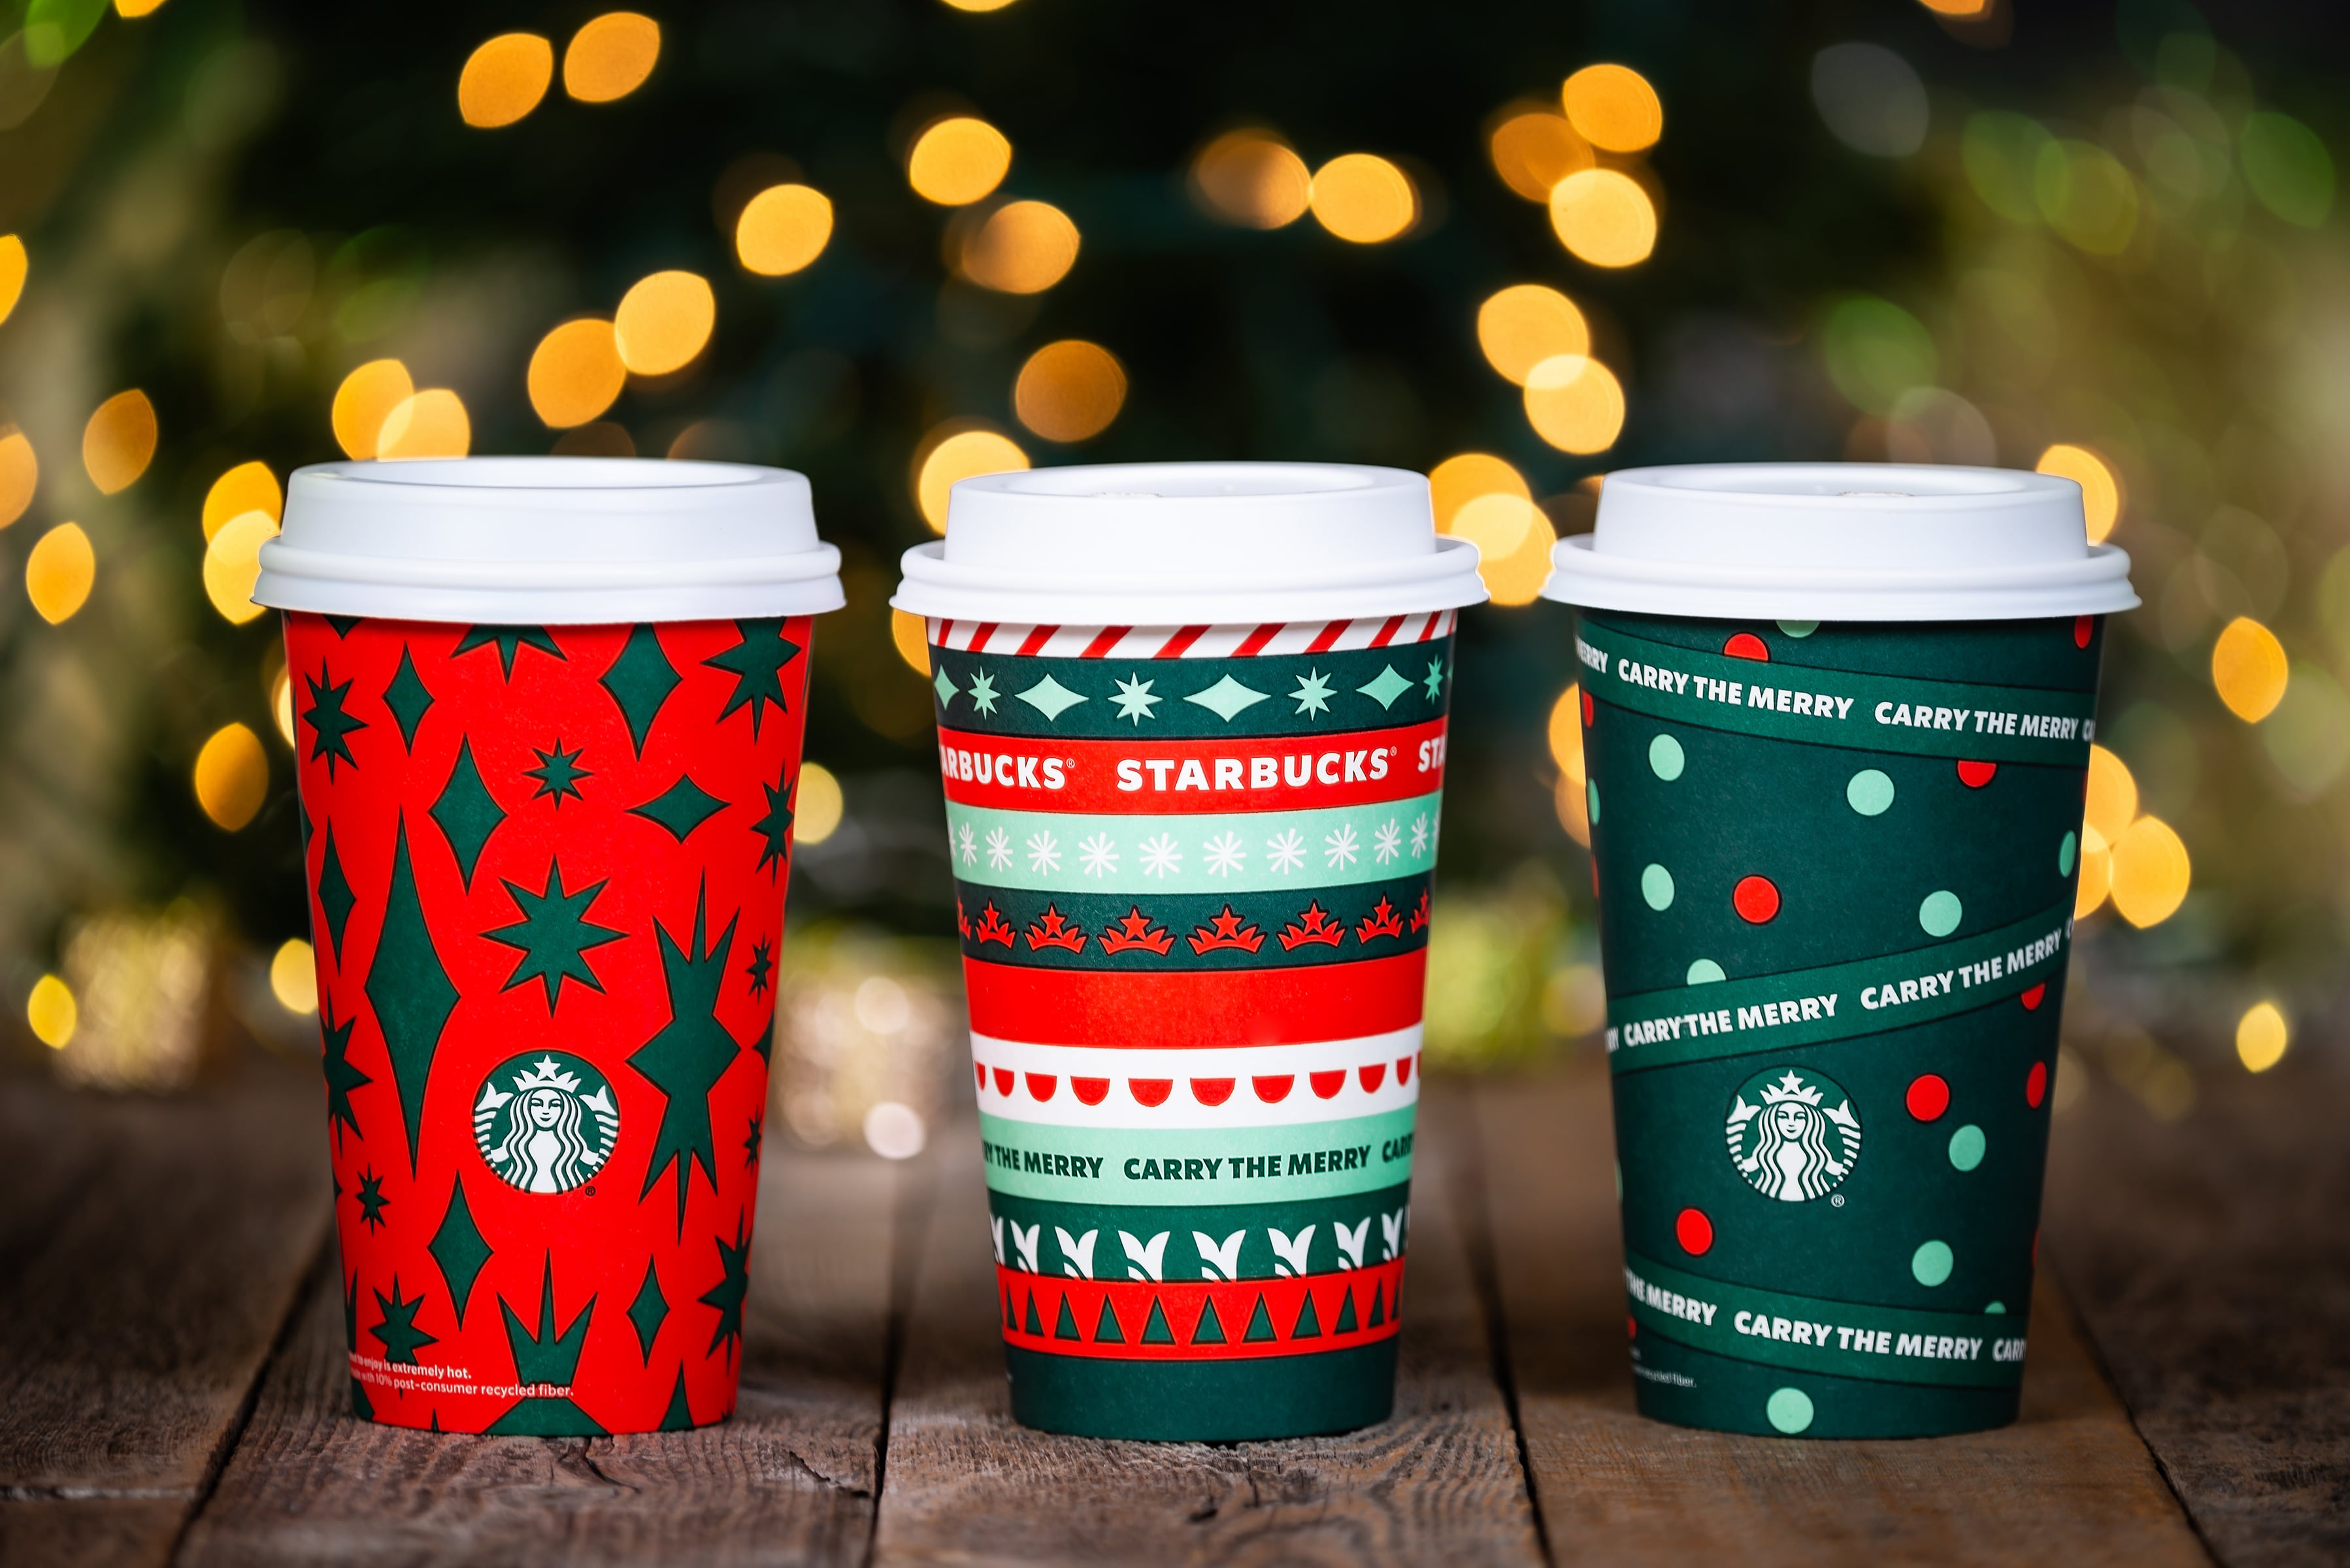 Starbucks holiday beverage cups in the new 2020 design